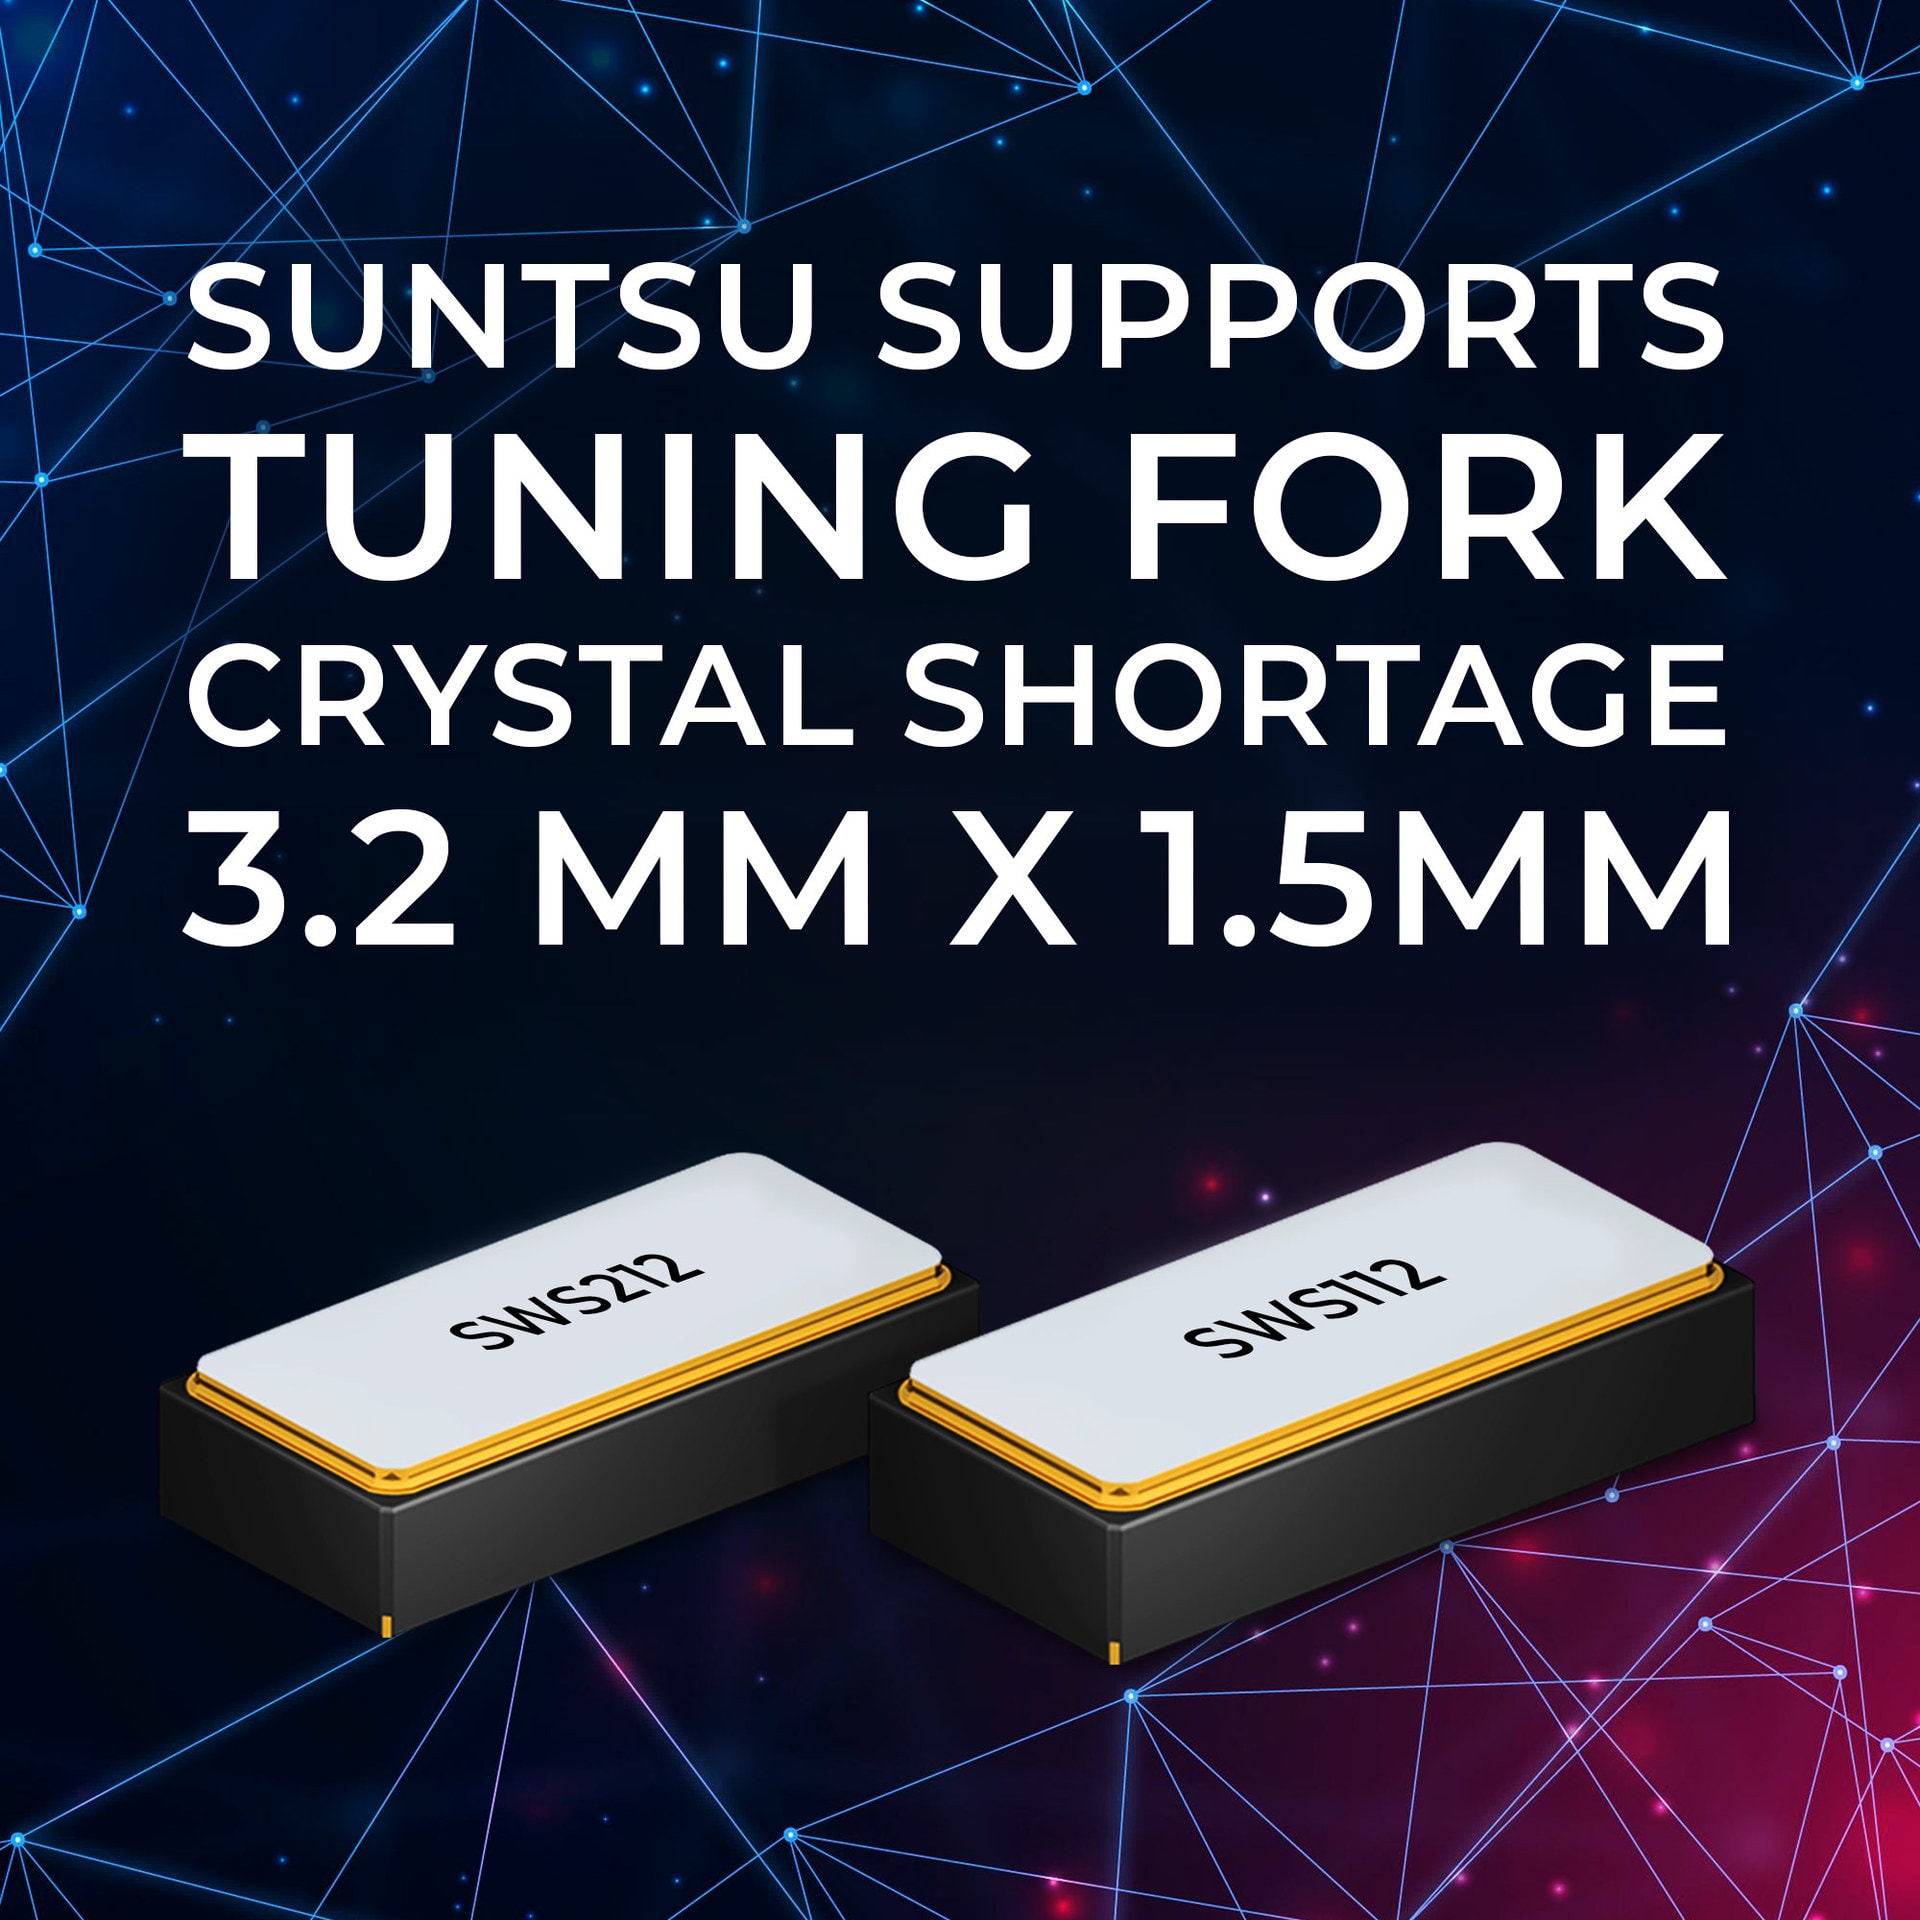 SUNTSU SUPPORTS TUNING FORK CRYSTAL SHORTAGES: 3.2 MM X 1.5MM